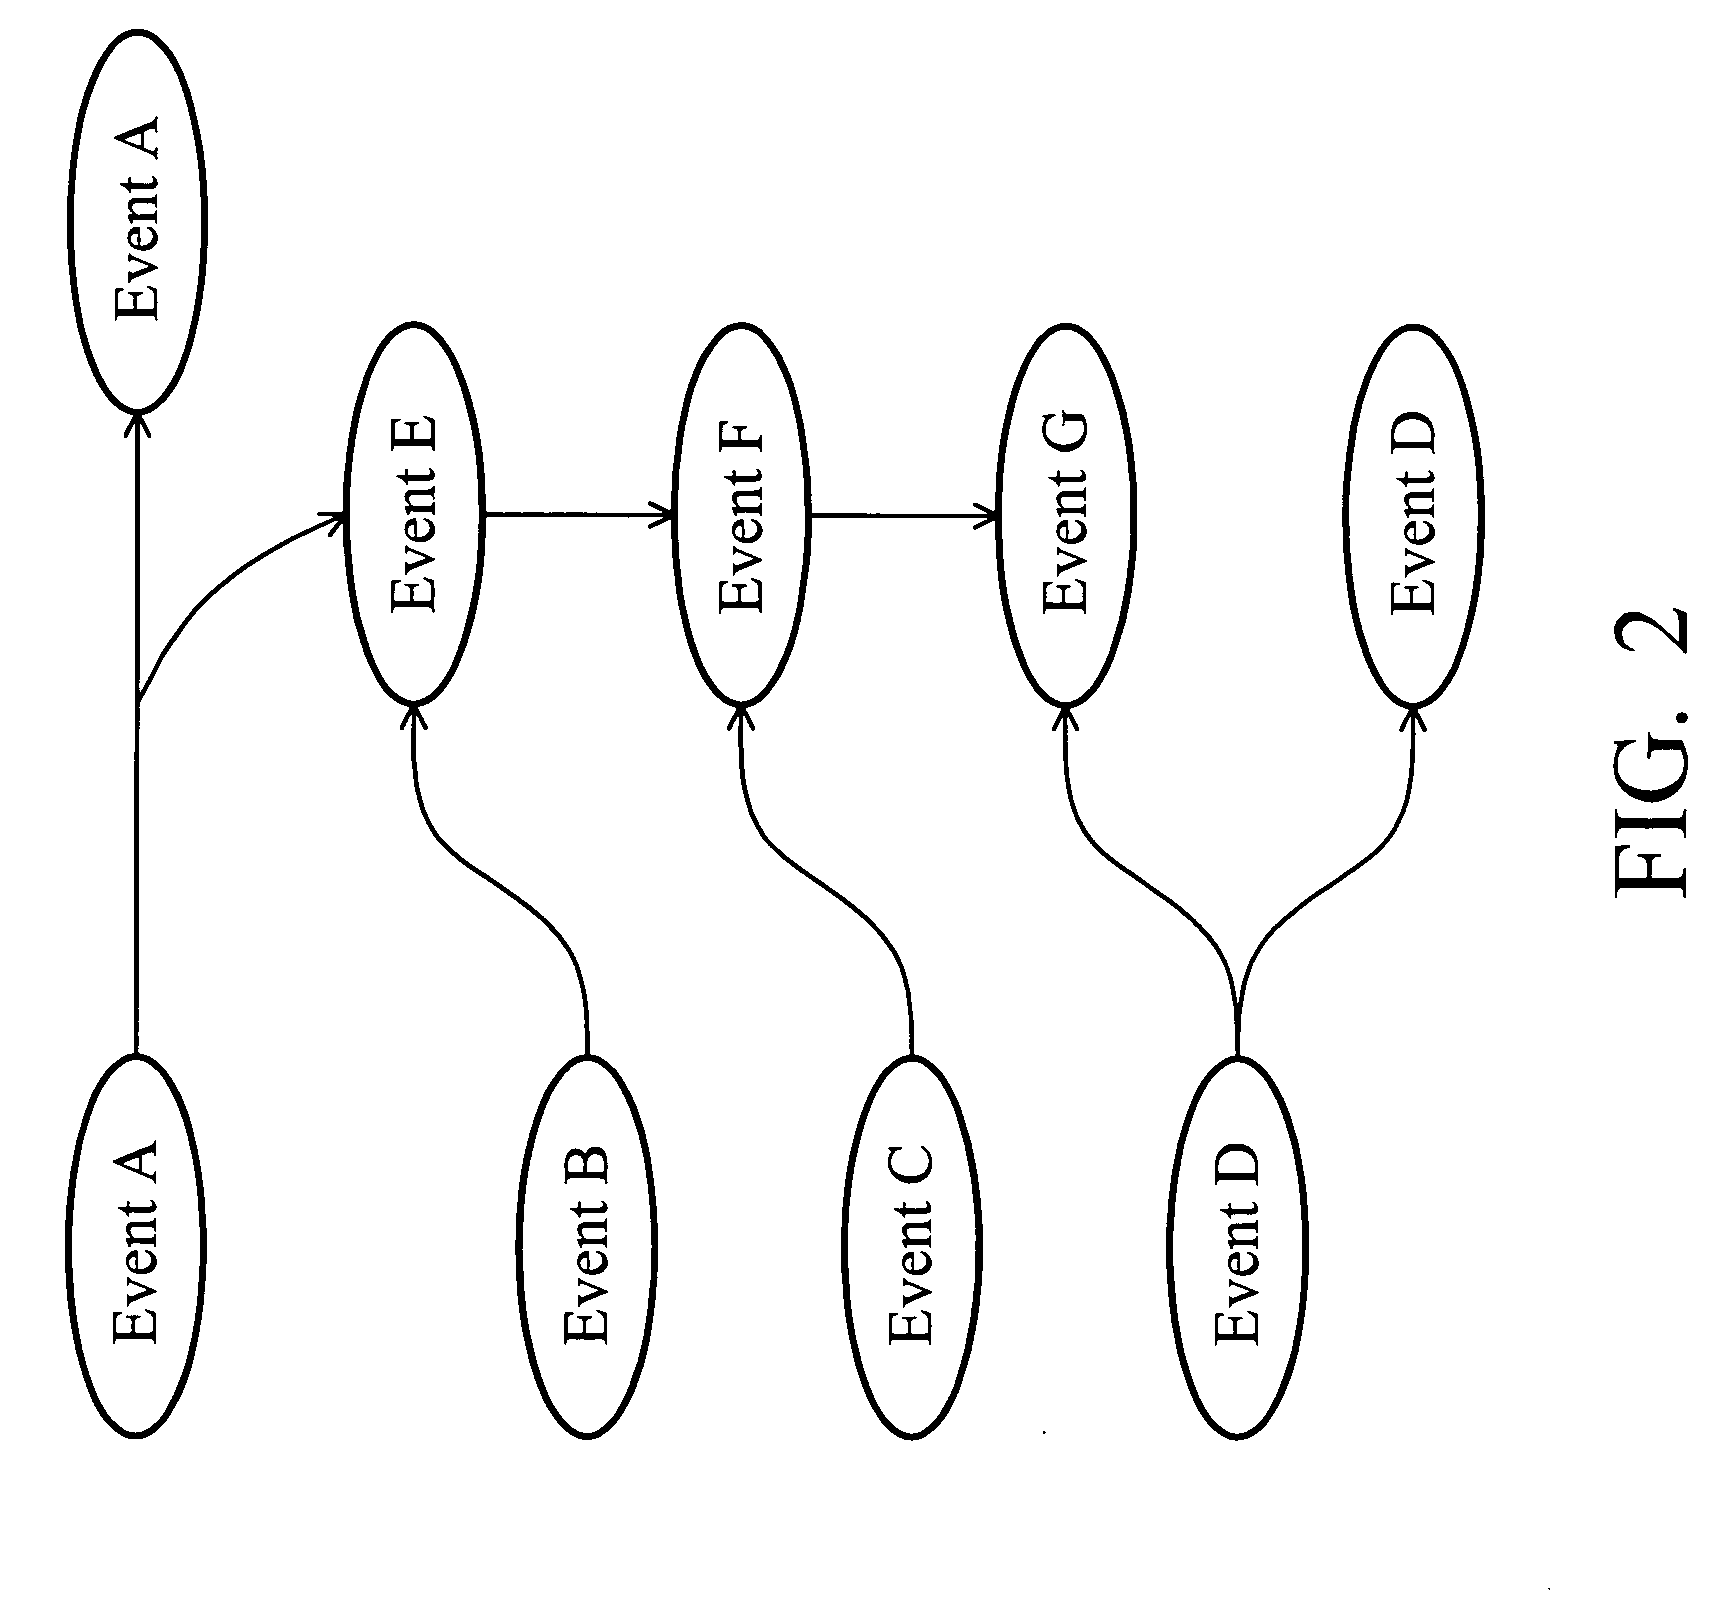 Complex event evaluation systems and methods